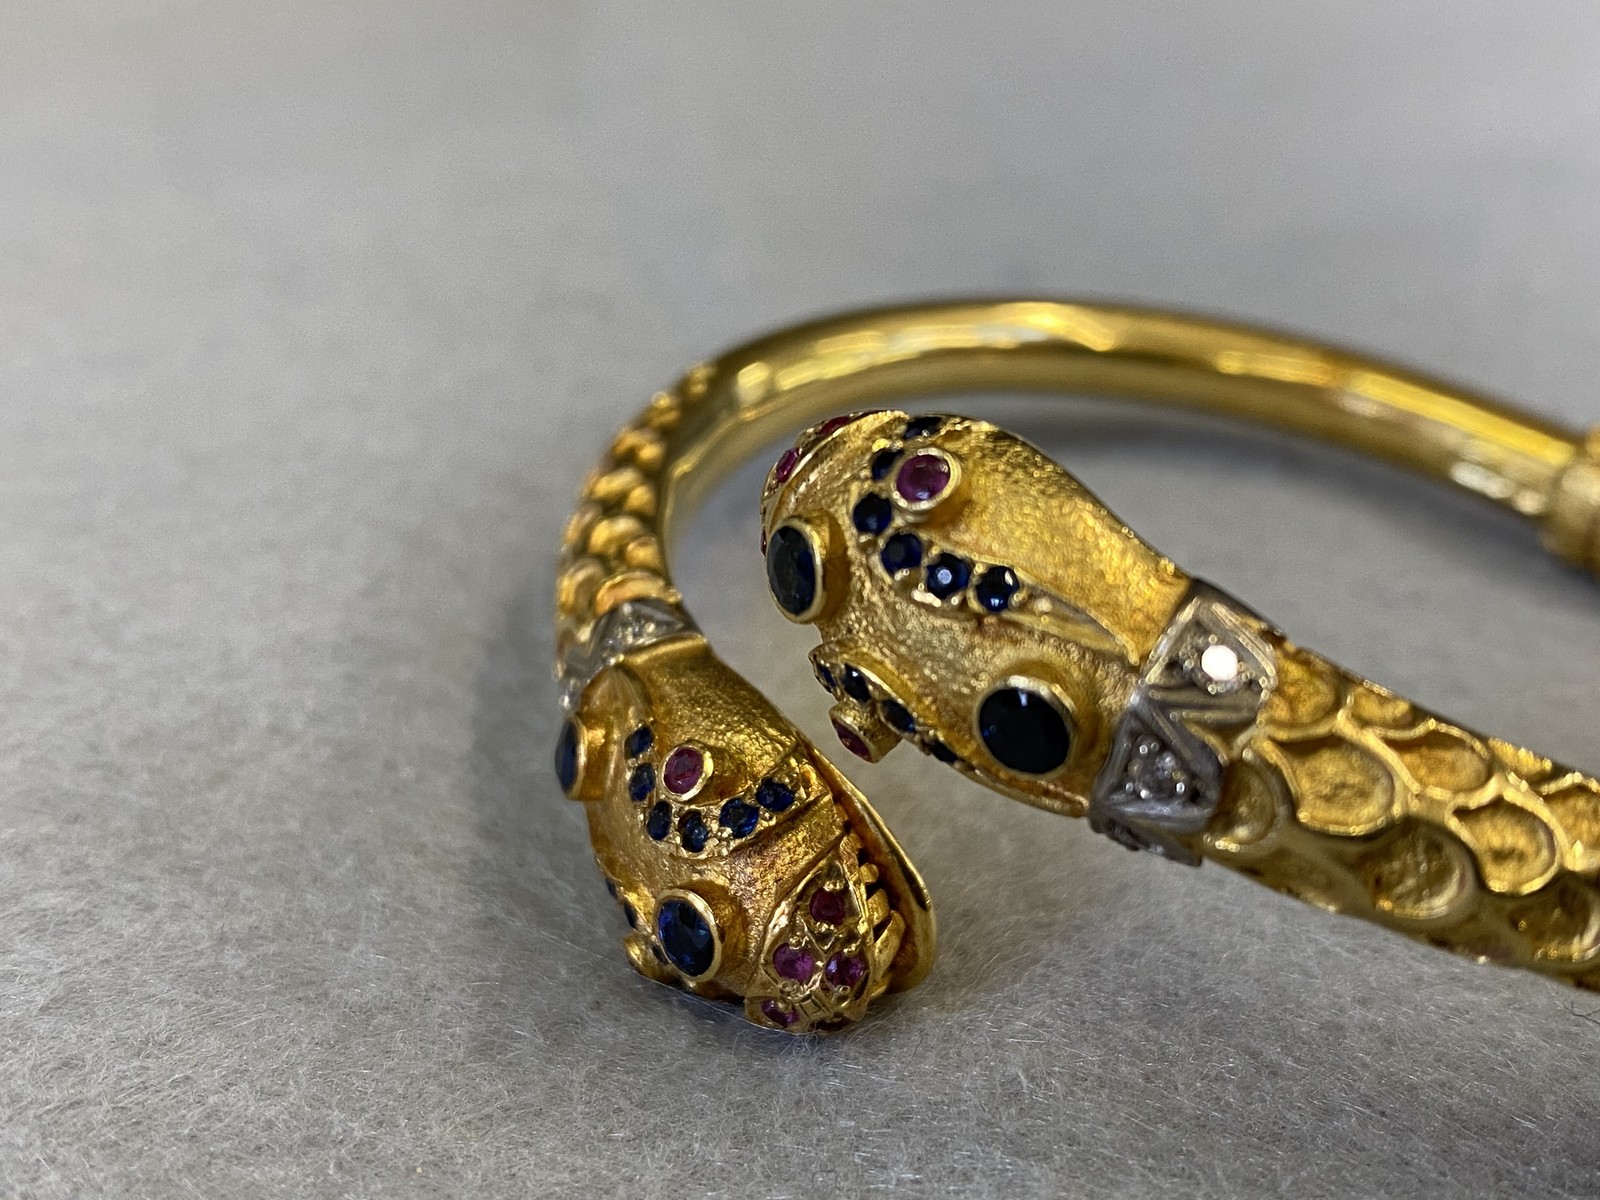 An 18k gold double headed serpent bangle, both heads encrusted with diamonds and semi-precious - Image 3 of 3